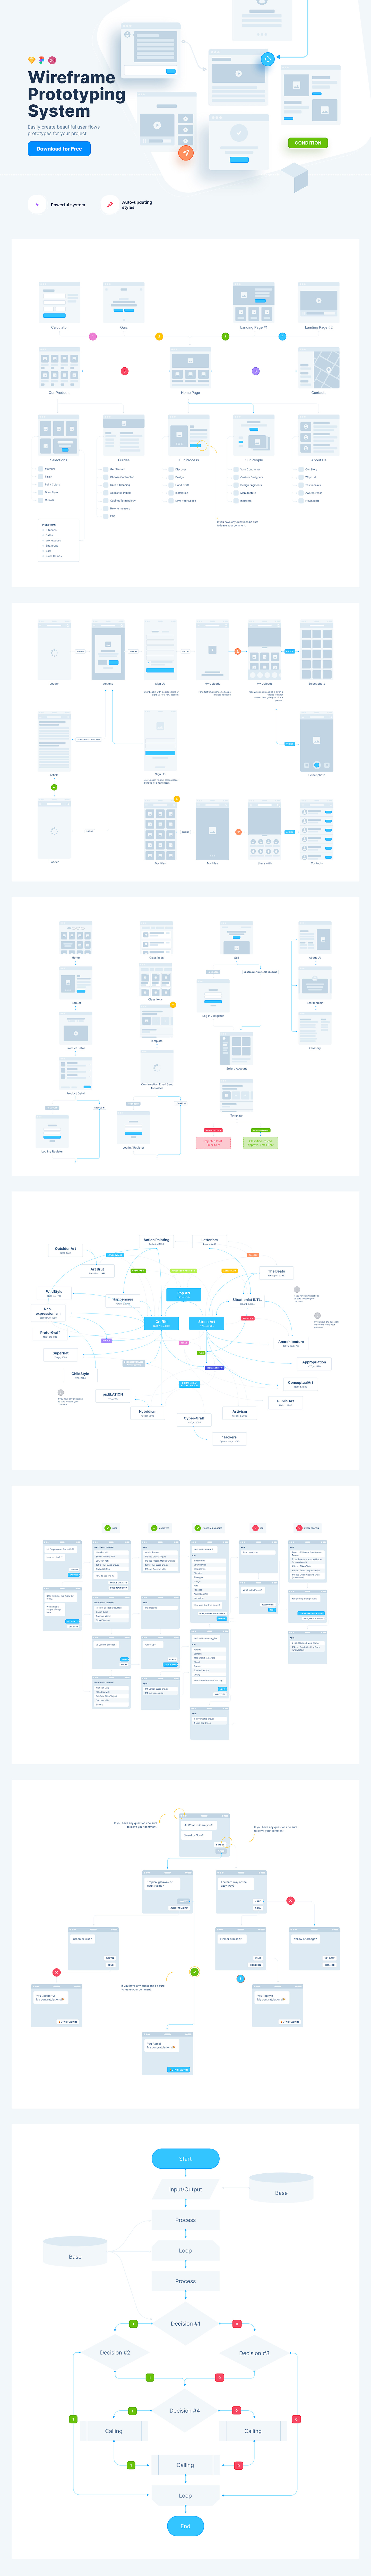 UX Flow - Wireframe Prototyping System